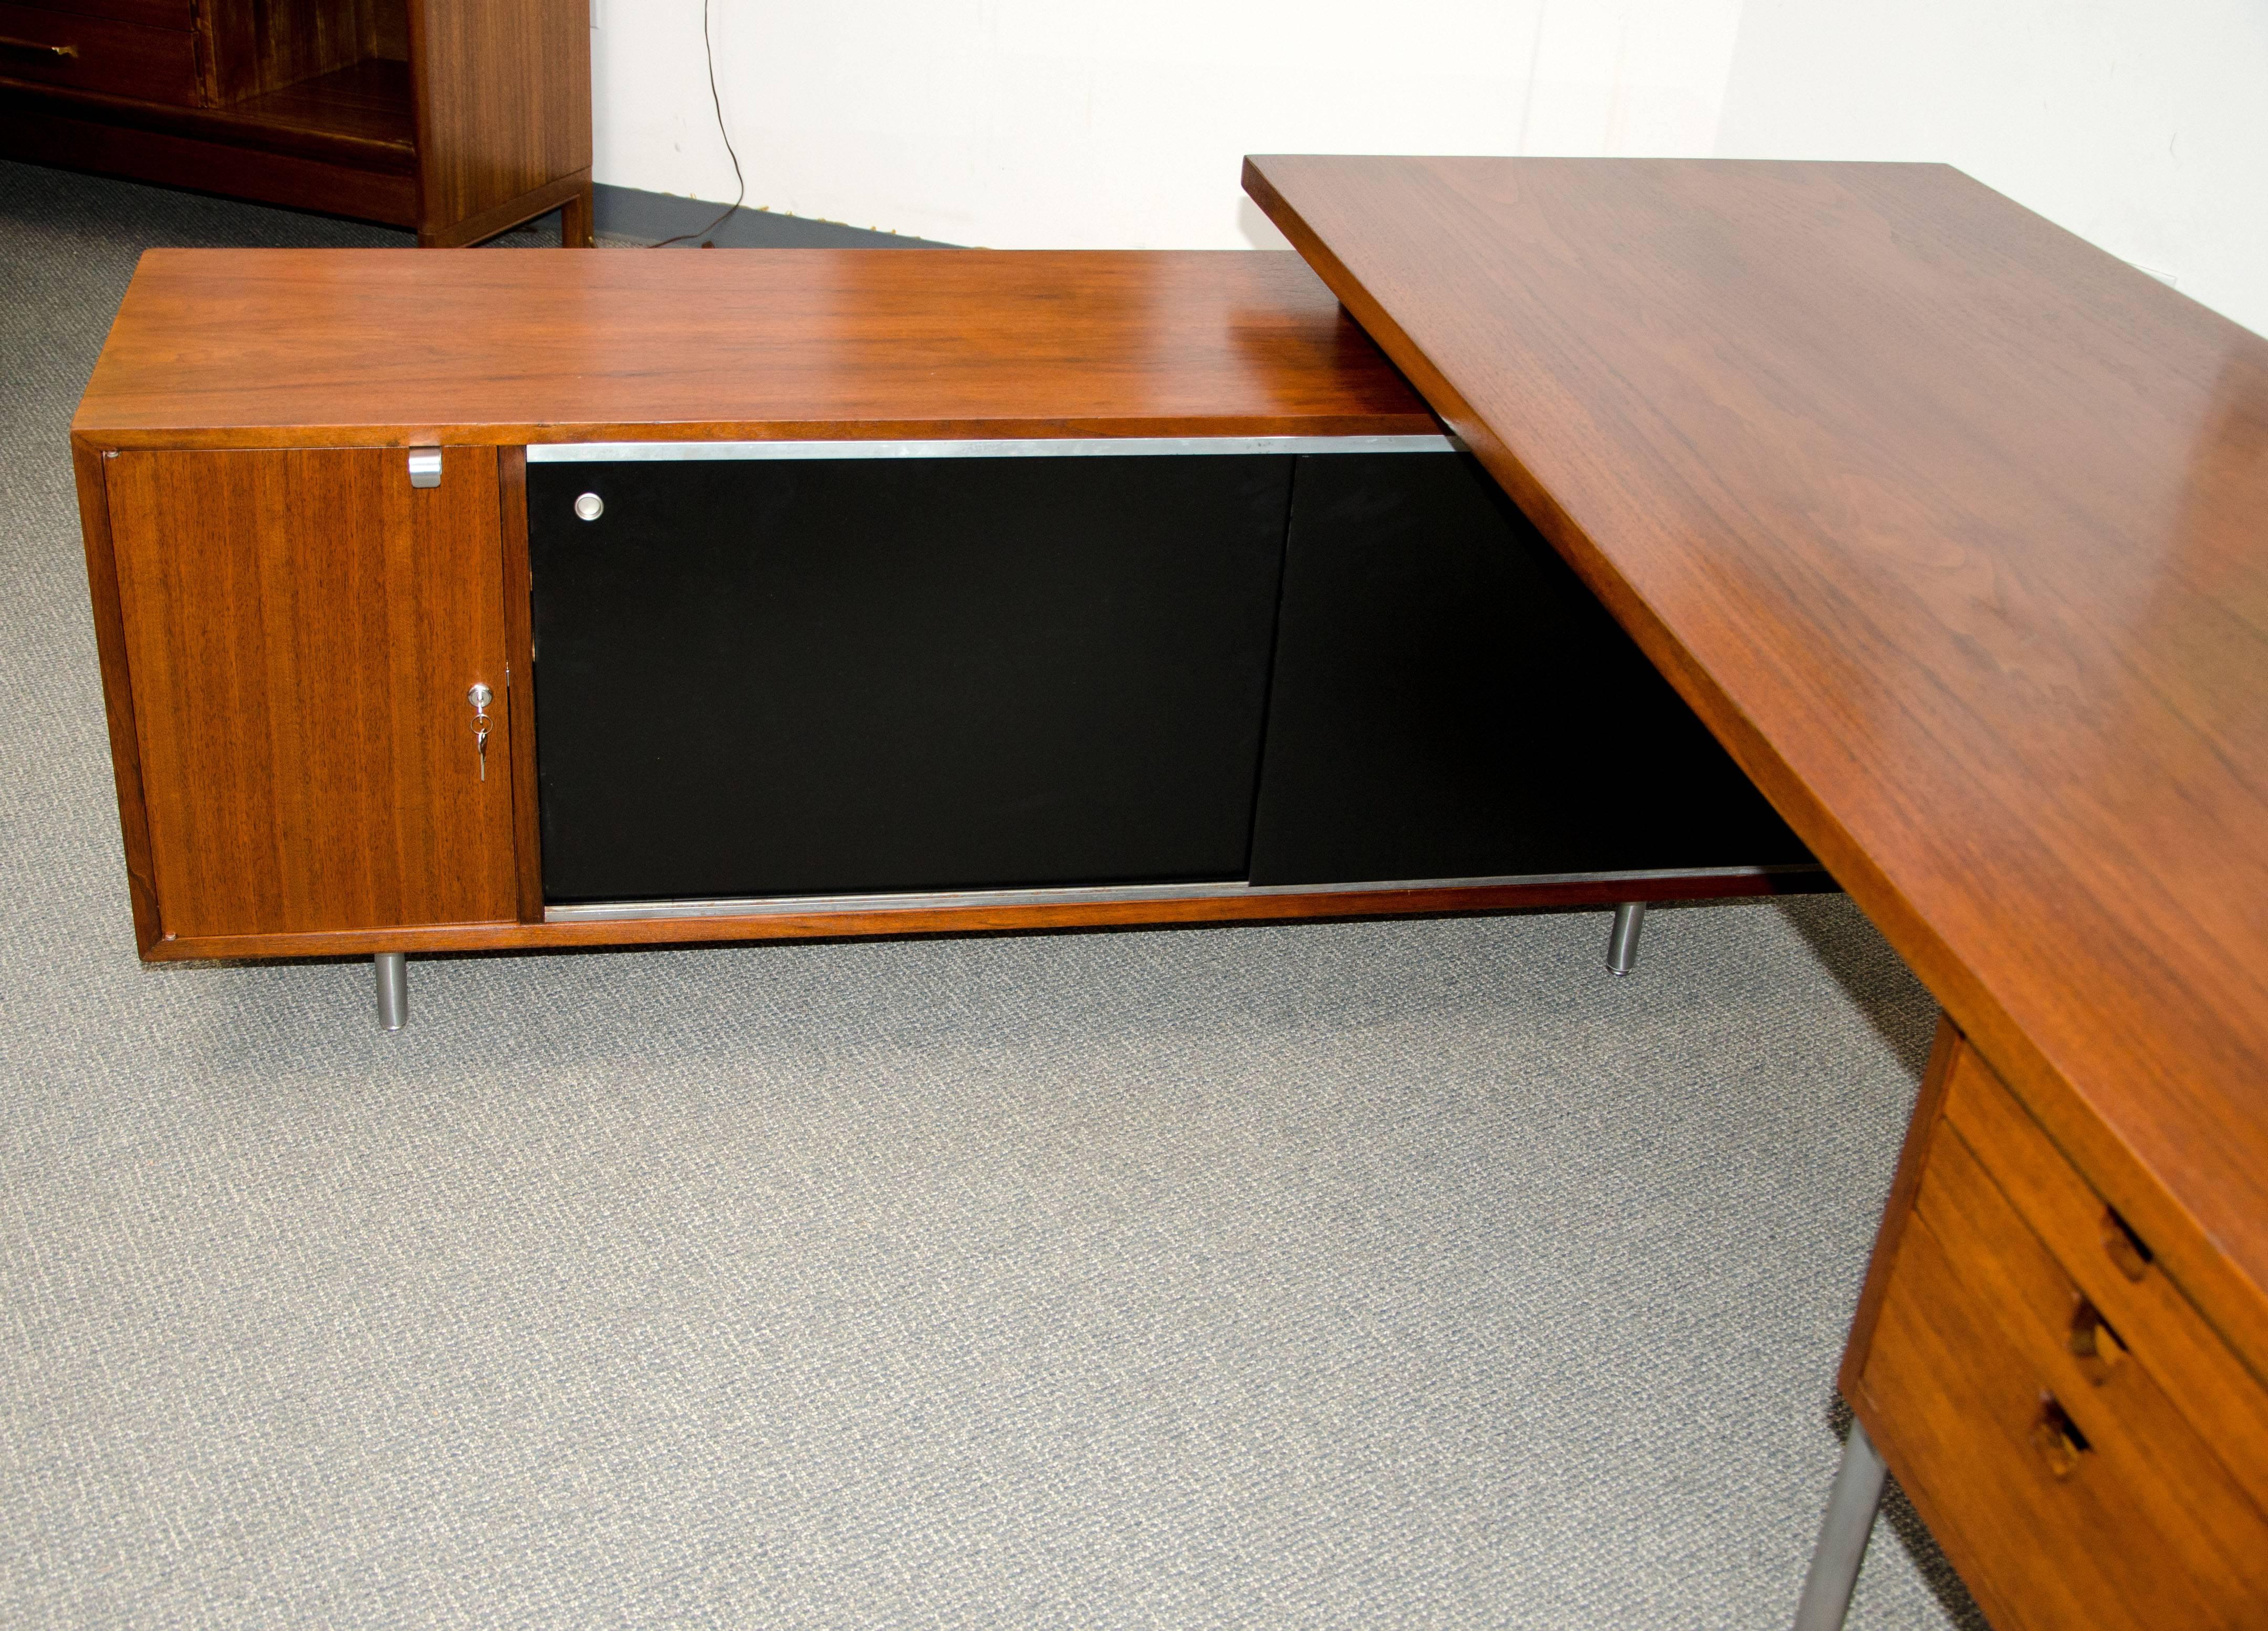 Very nice Mid-Century walnut executive desk with a credenza return. It can be placed in the center of a room with access to all sides. The desk is attached to the credenza in an 